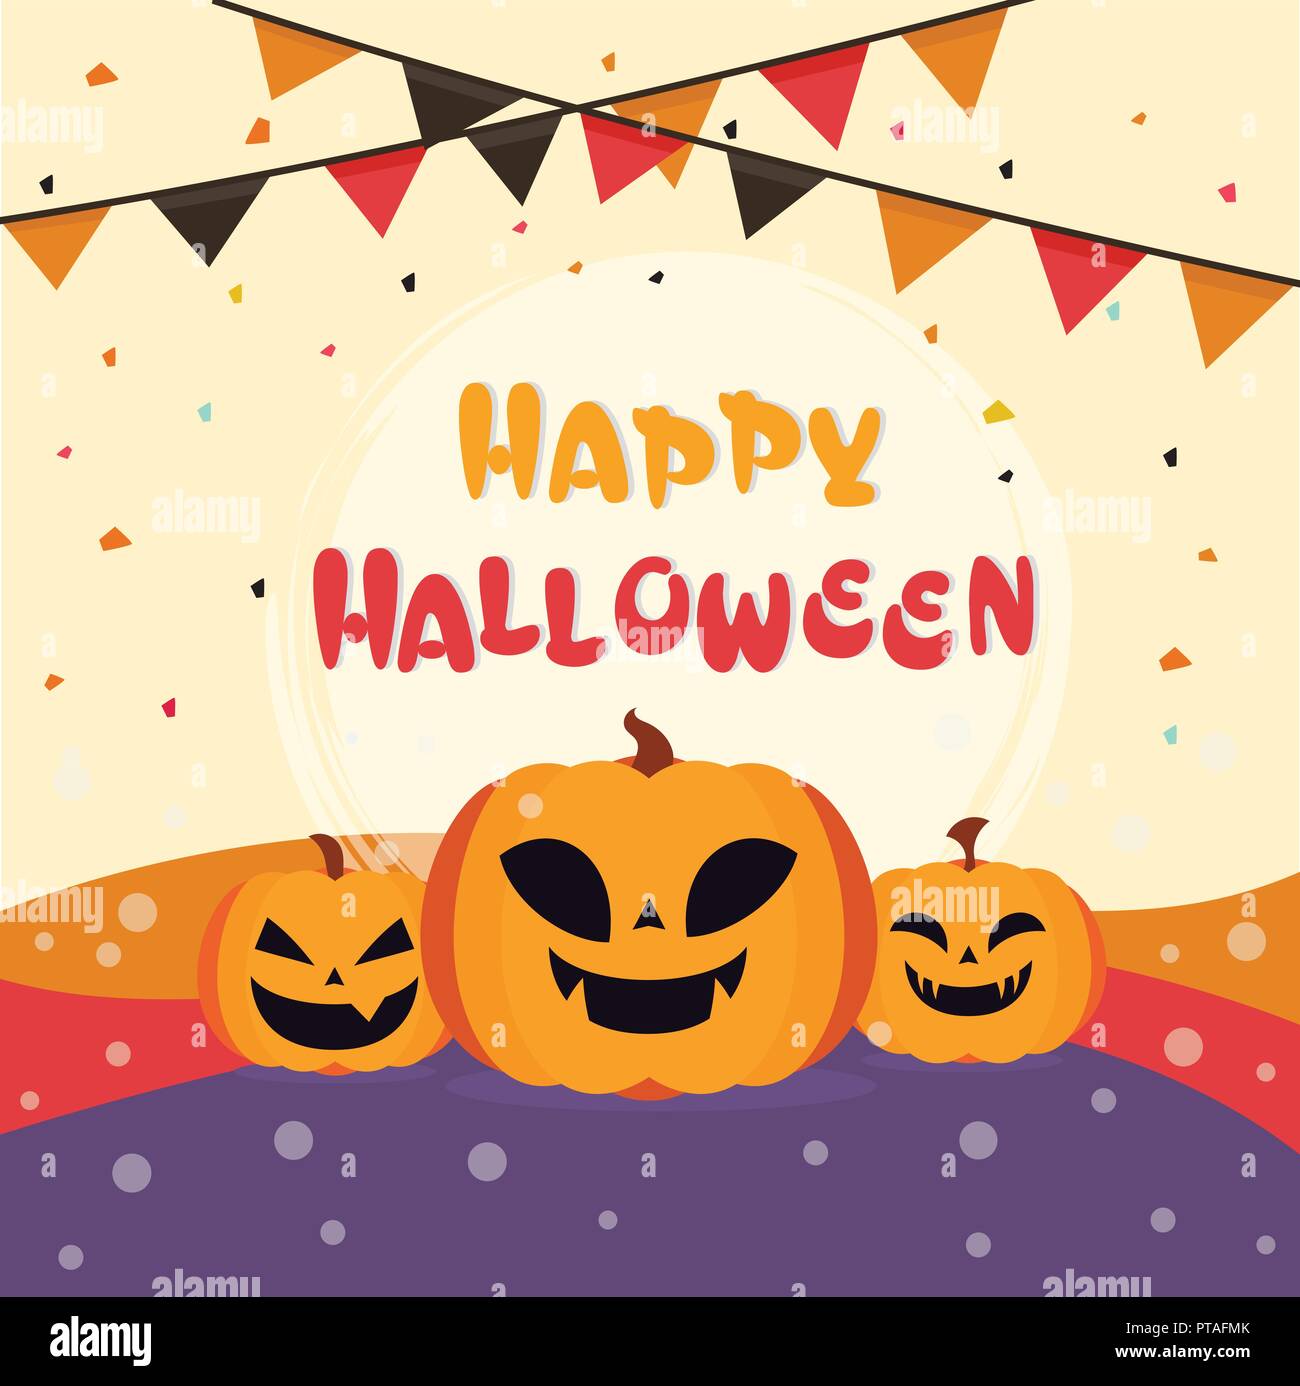 Happy Halloween poster design for decoration in party Stock Vector